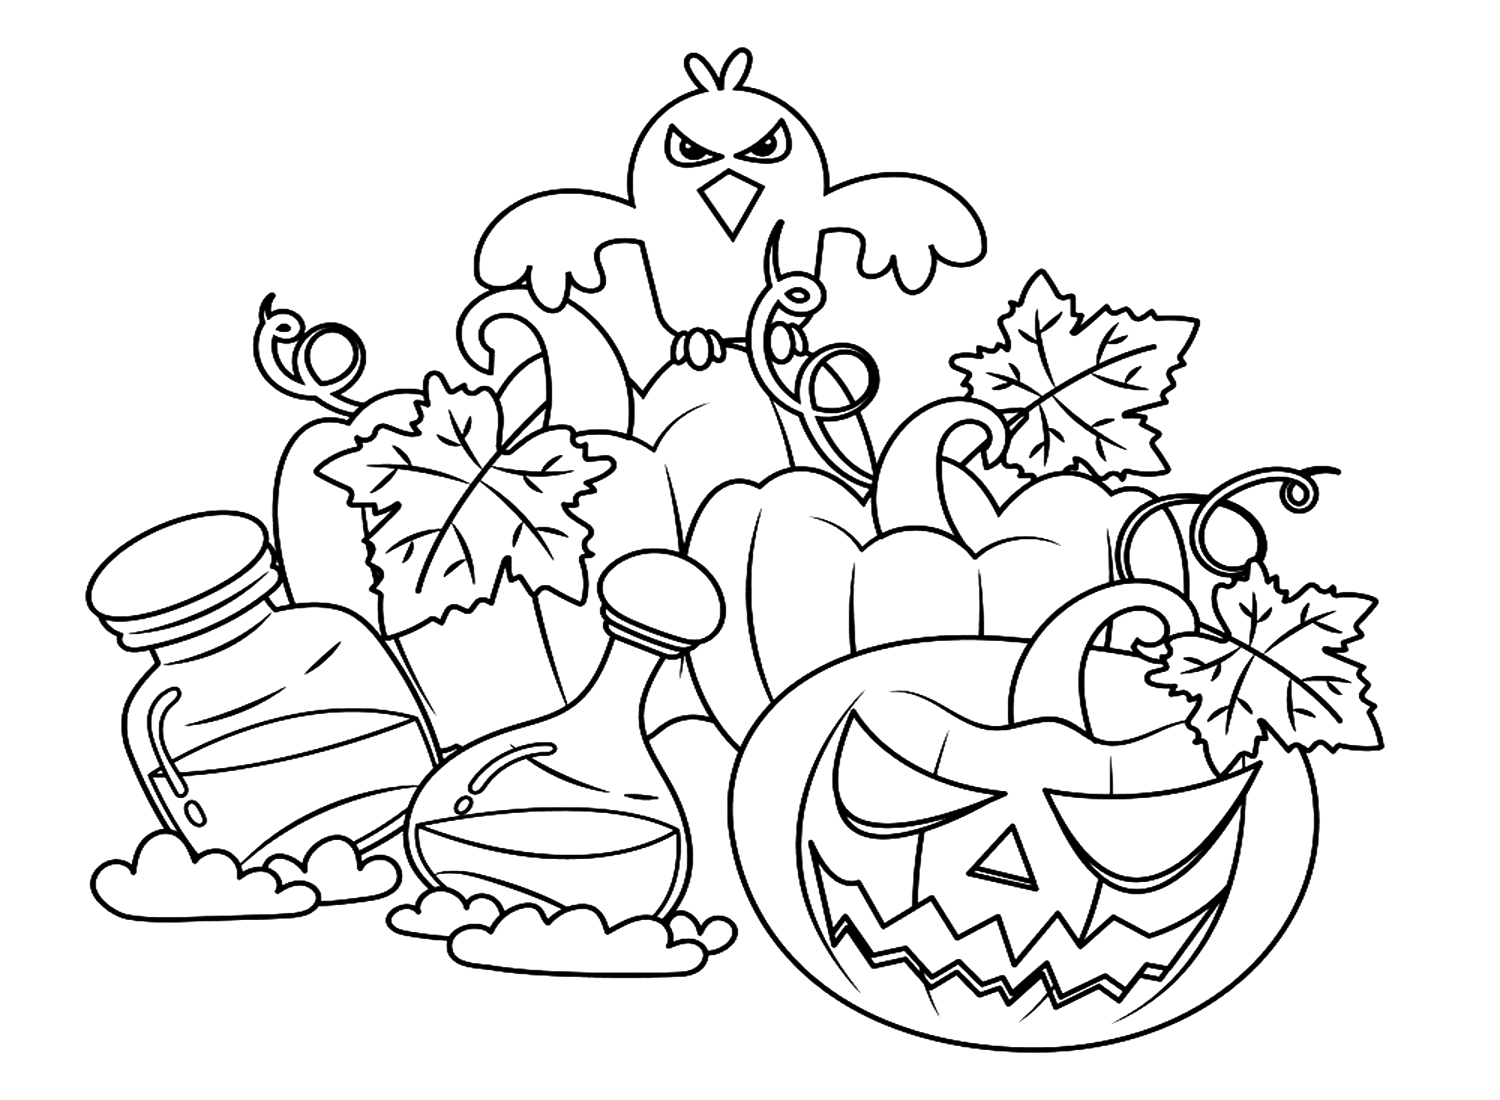 Crow And Pumpkin Coloring Page from Crow